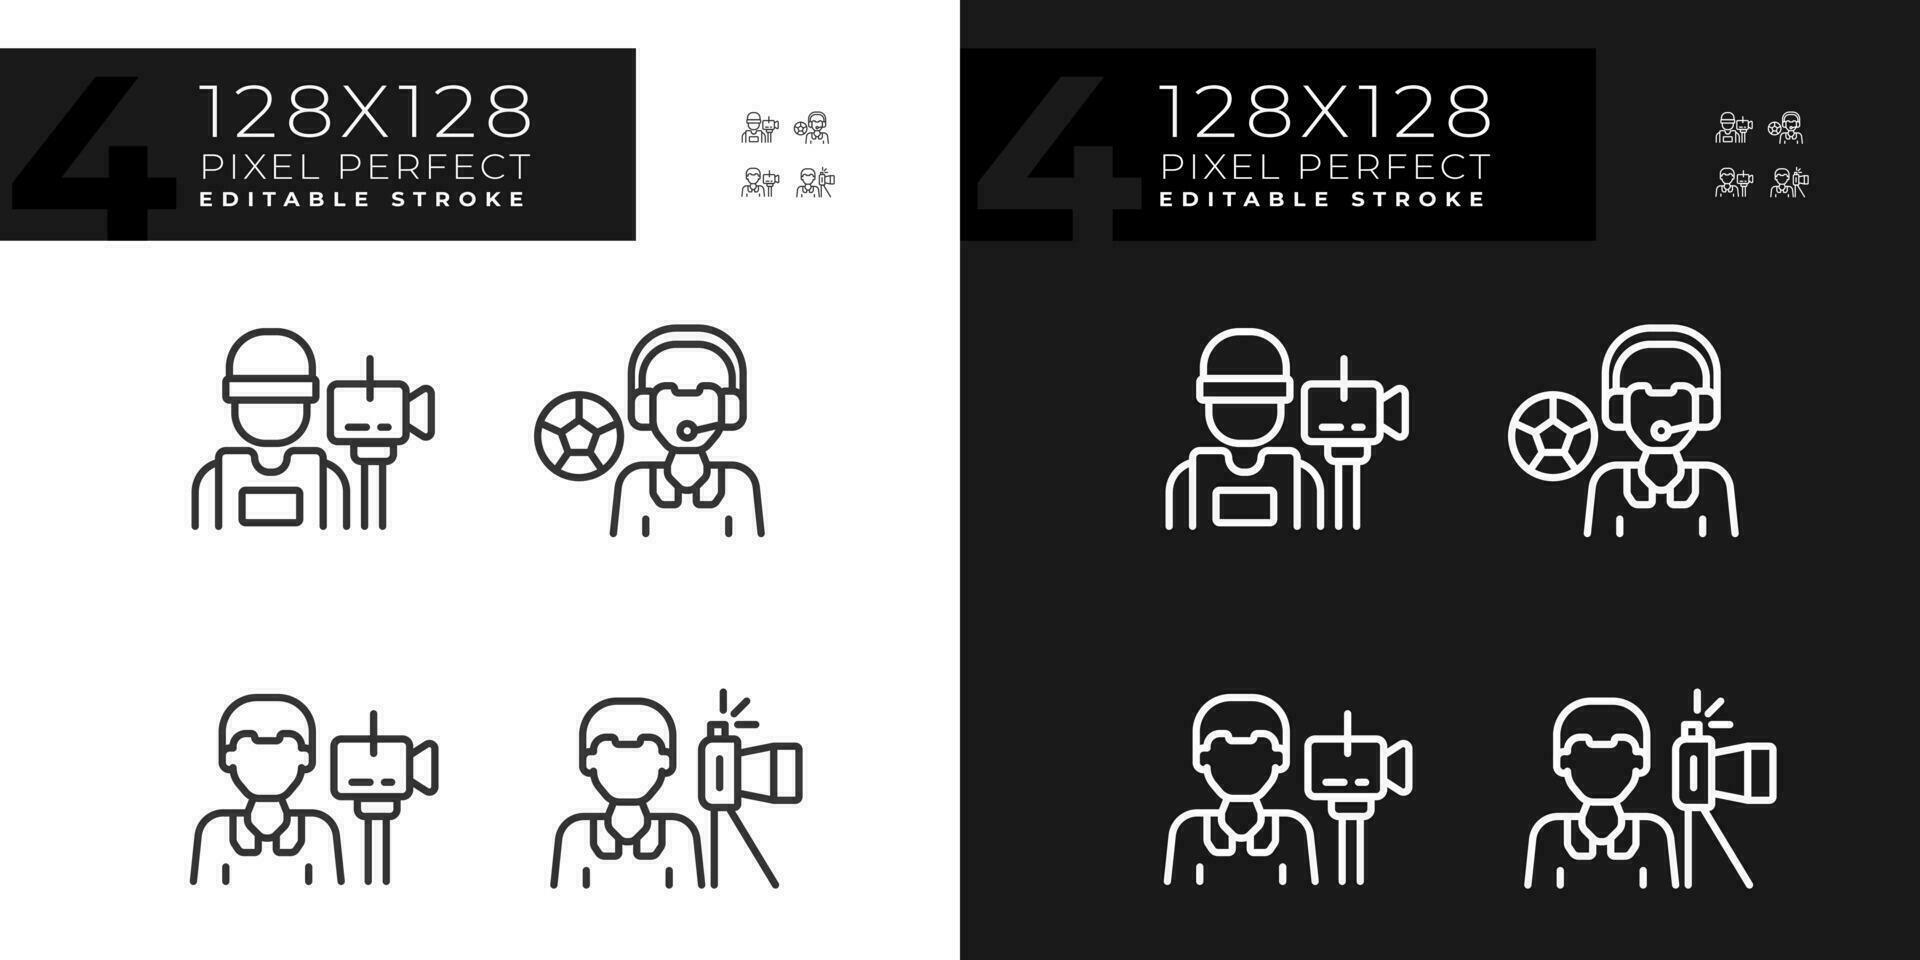 Pixel perfect set of dark and light icons representing journalism, editable thin line illustration. vector